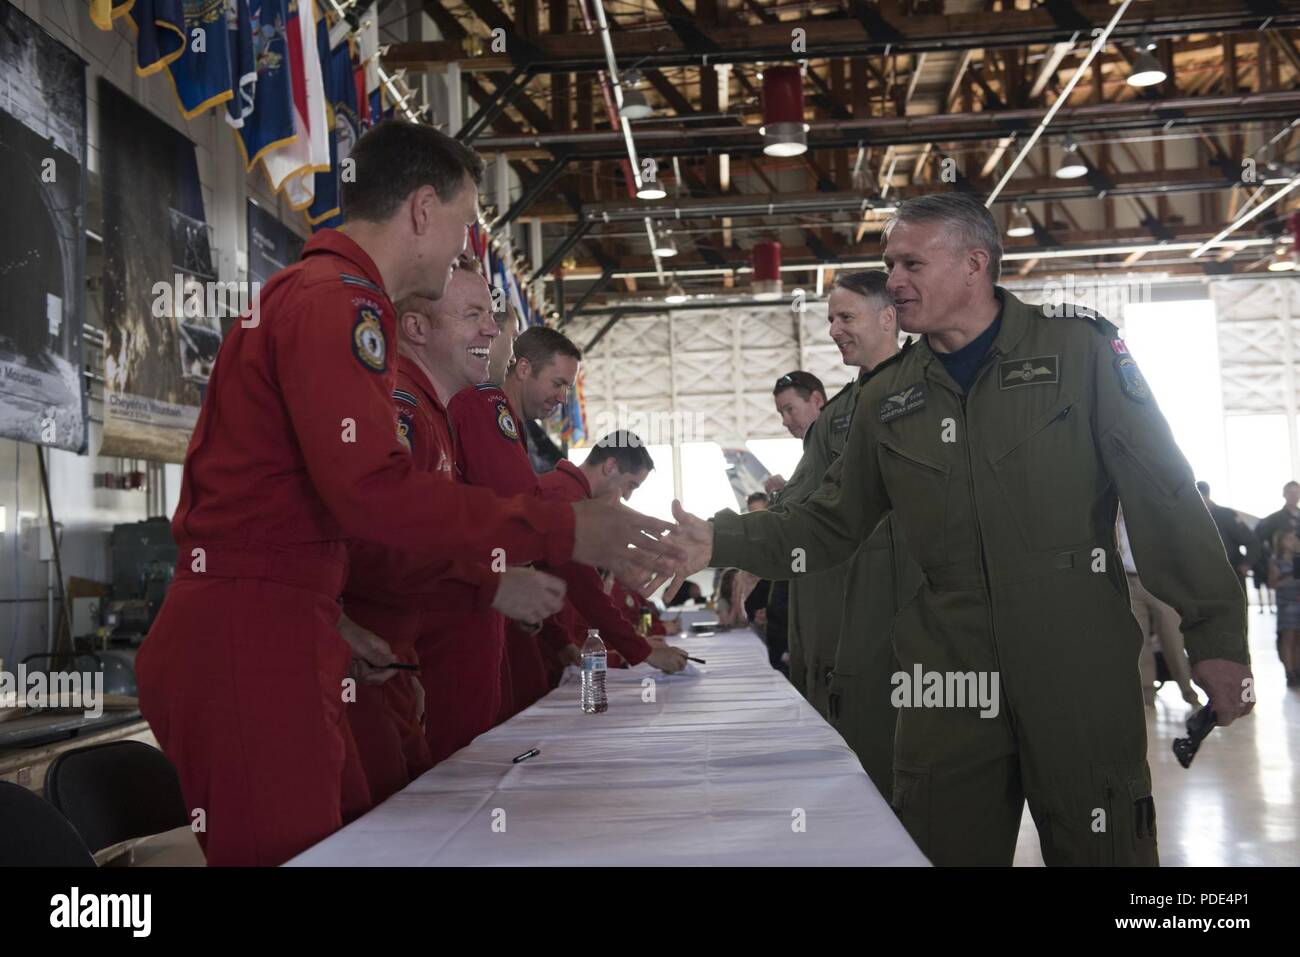 Members of the Royal Canadian Air Force’s Snowbirds aerial demonstration team greet guests at the North American Aerospace Defense Command's 60th Anniversary Ceremony on Peterson Air Force Base Colorado, May 12, 2018. The ceremony and static display of various NORAD aircraft was the culmination of a three-day event, which included a media tour of Cheyenne Mountain Air Force Station, the dedication of a cairn outside the commands' headquarters building memorializing the Canadians who have passed away while serving NORAD, and a fly over in missing-man formation performed by the Royal Canadian Ai Stock Photo